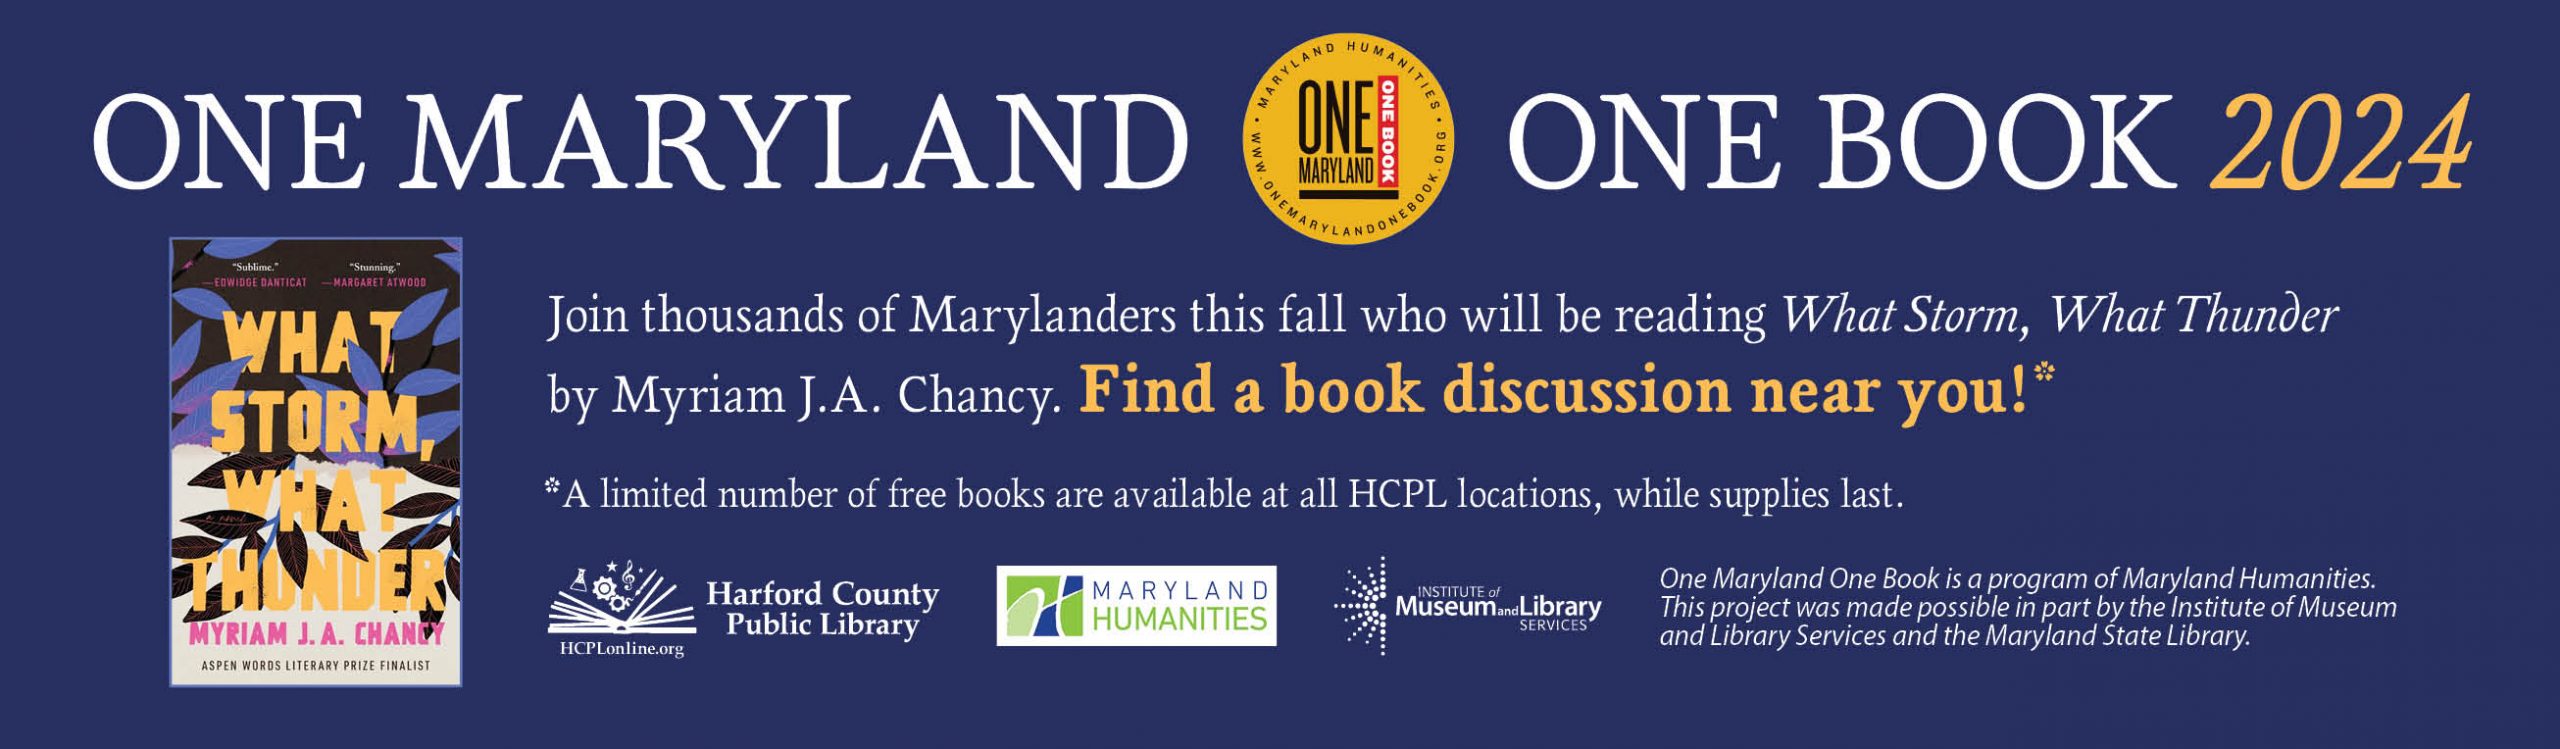 One Maryland One Book 2024 - Join thousands of Marylanders this fall who will be reading What Storm, What Thunder by Myriam J.A. Chancy.